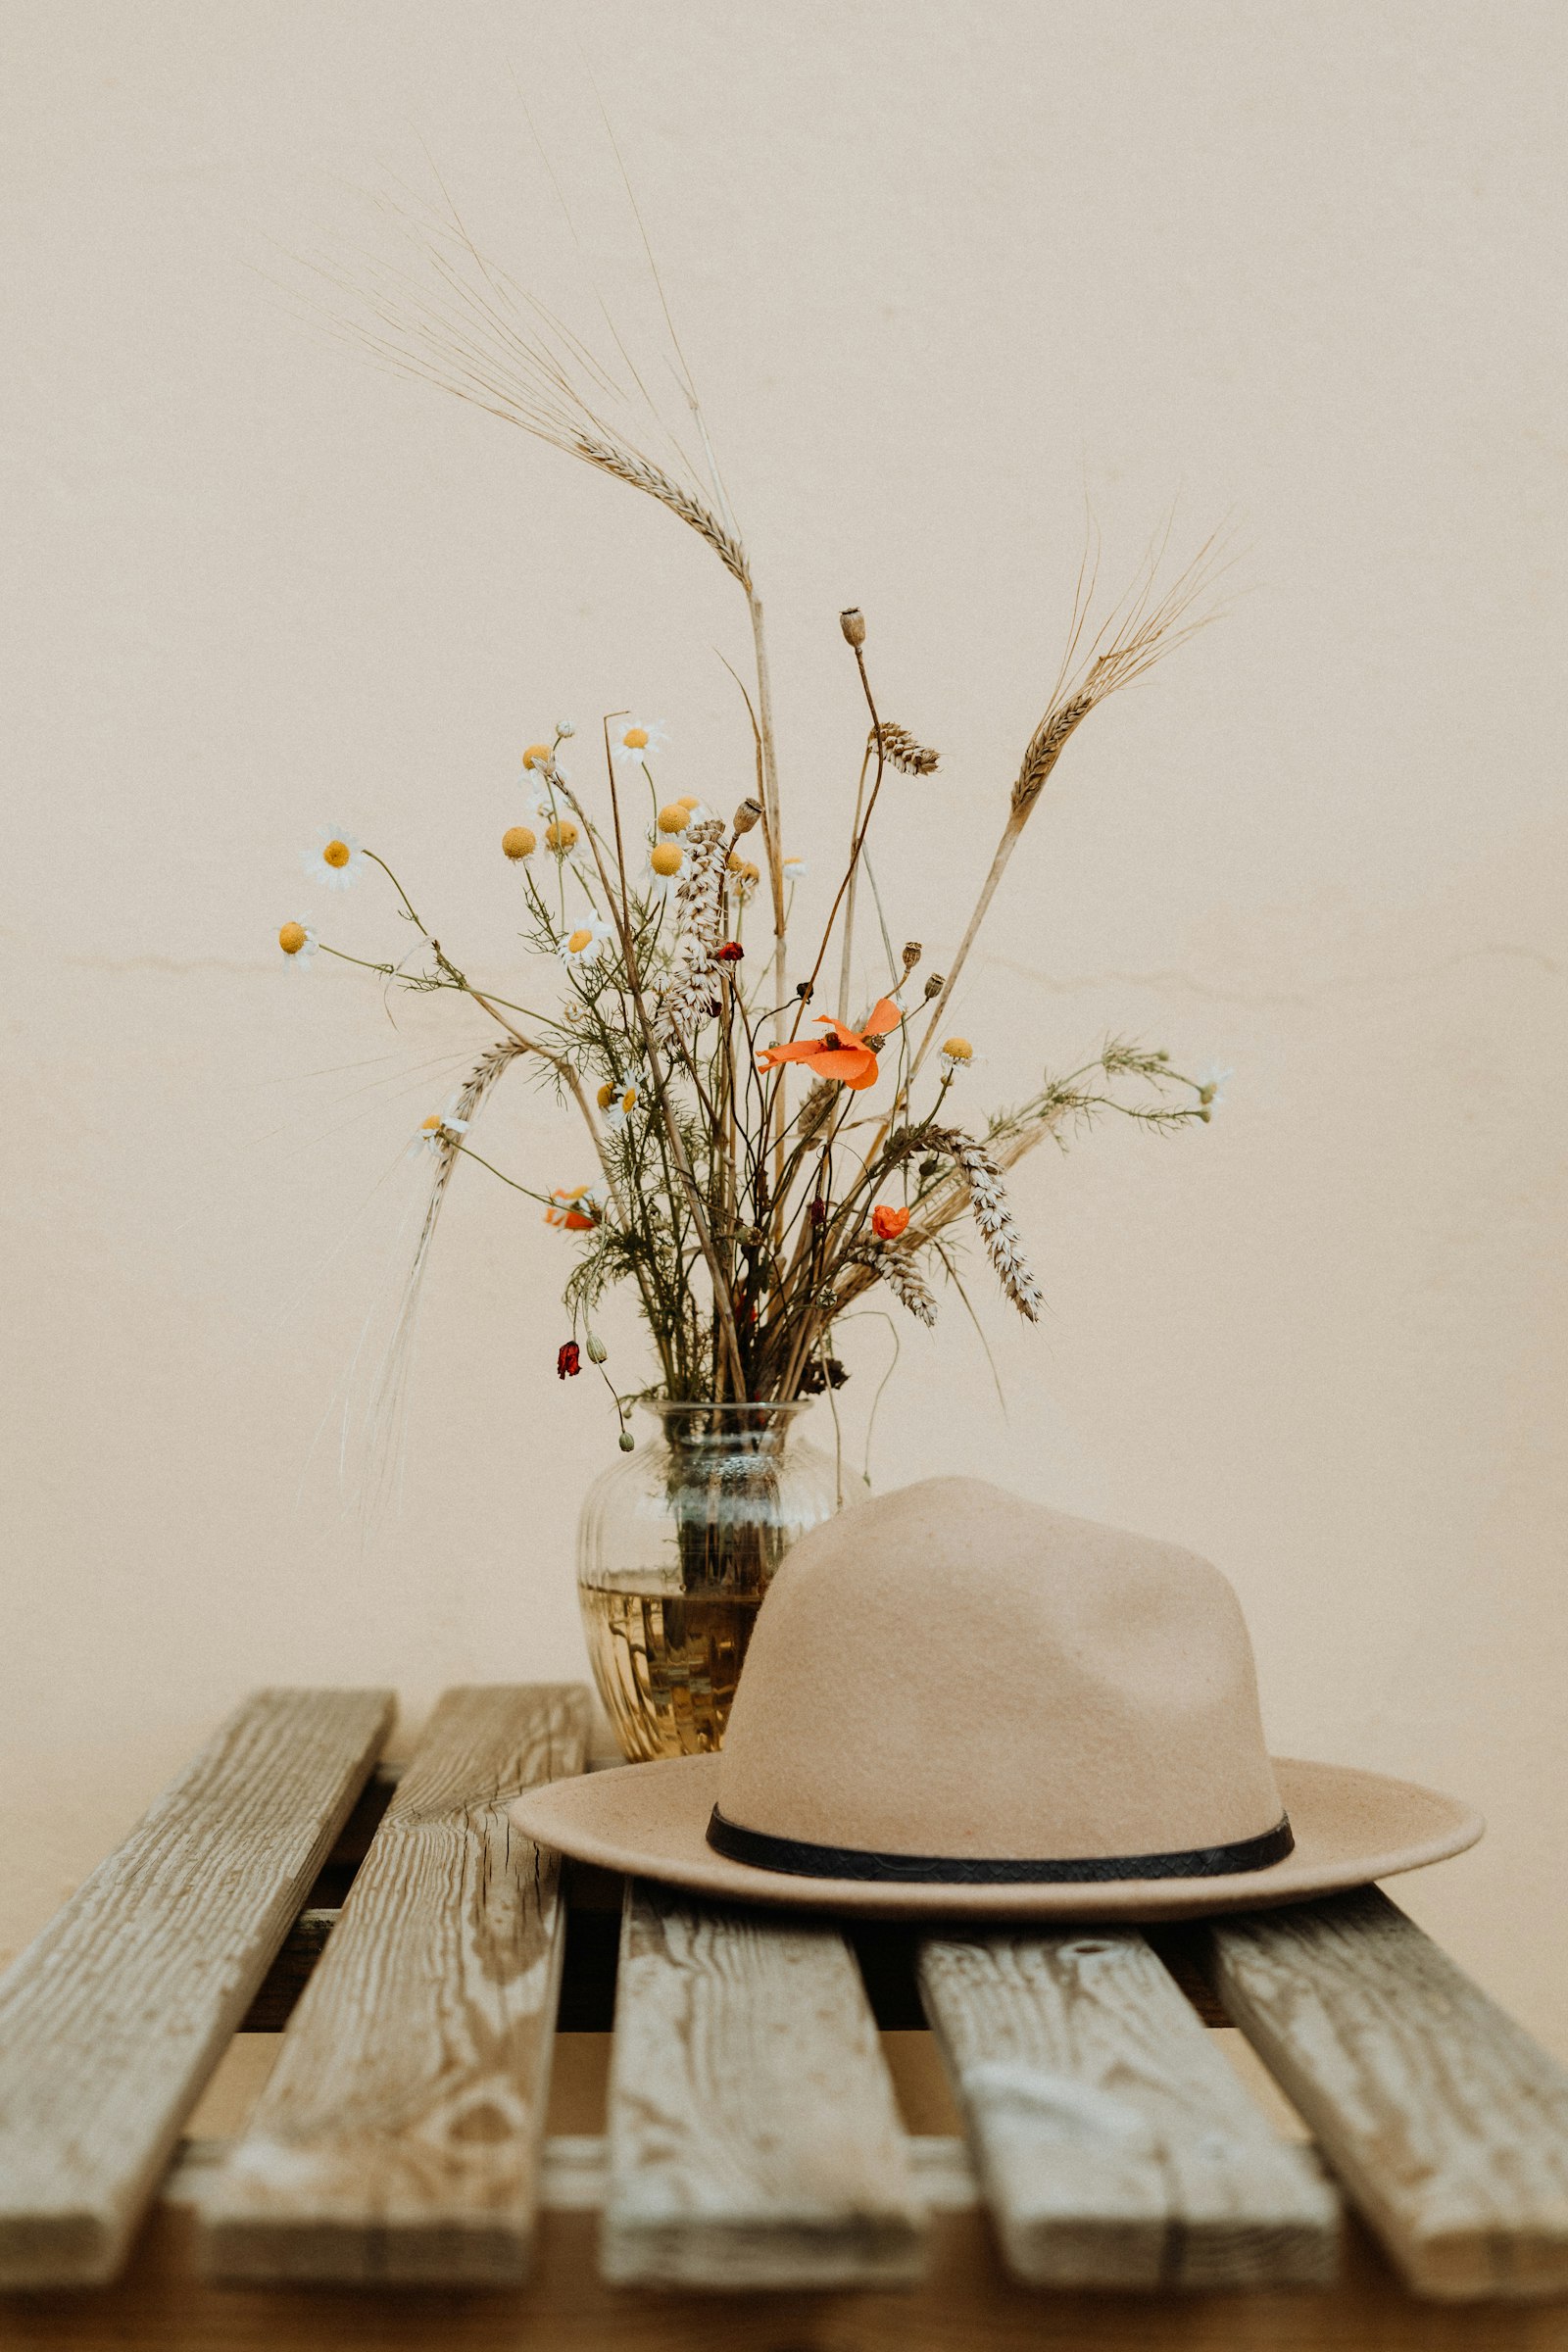 Sony a7 sample photo. Brown hat on wooden photography